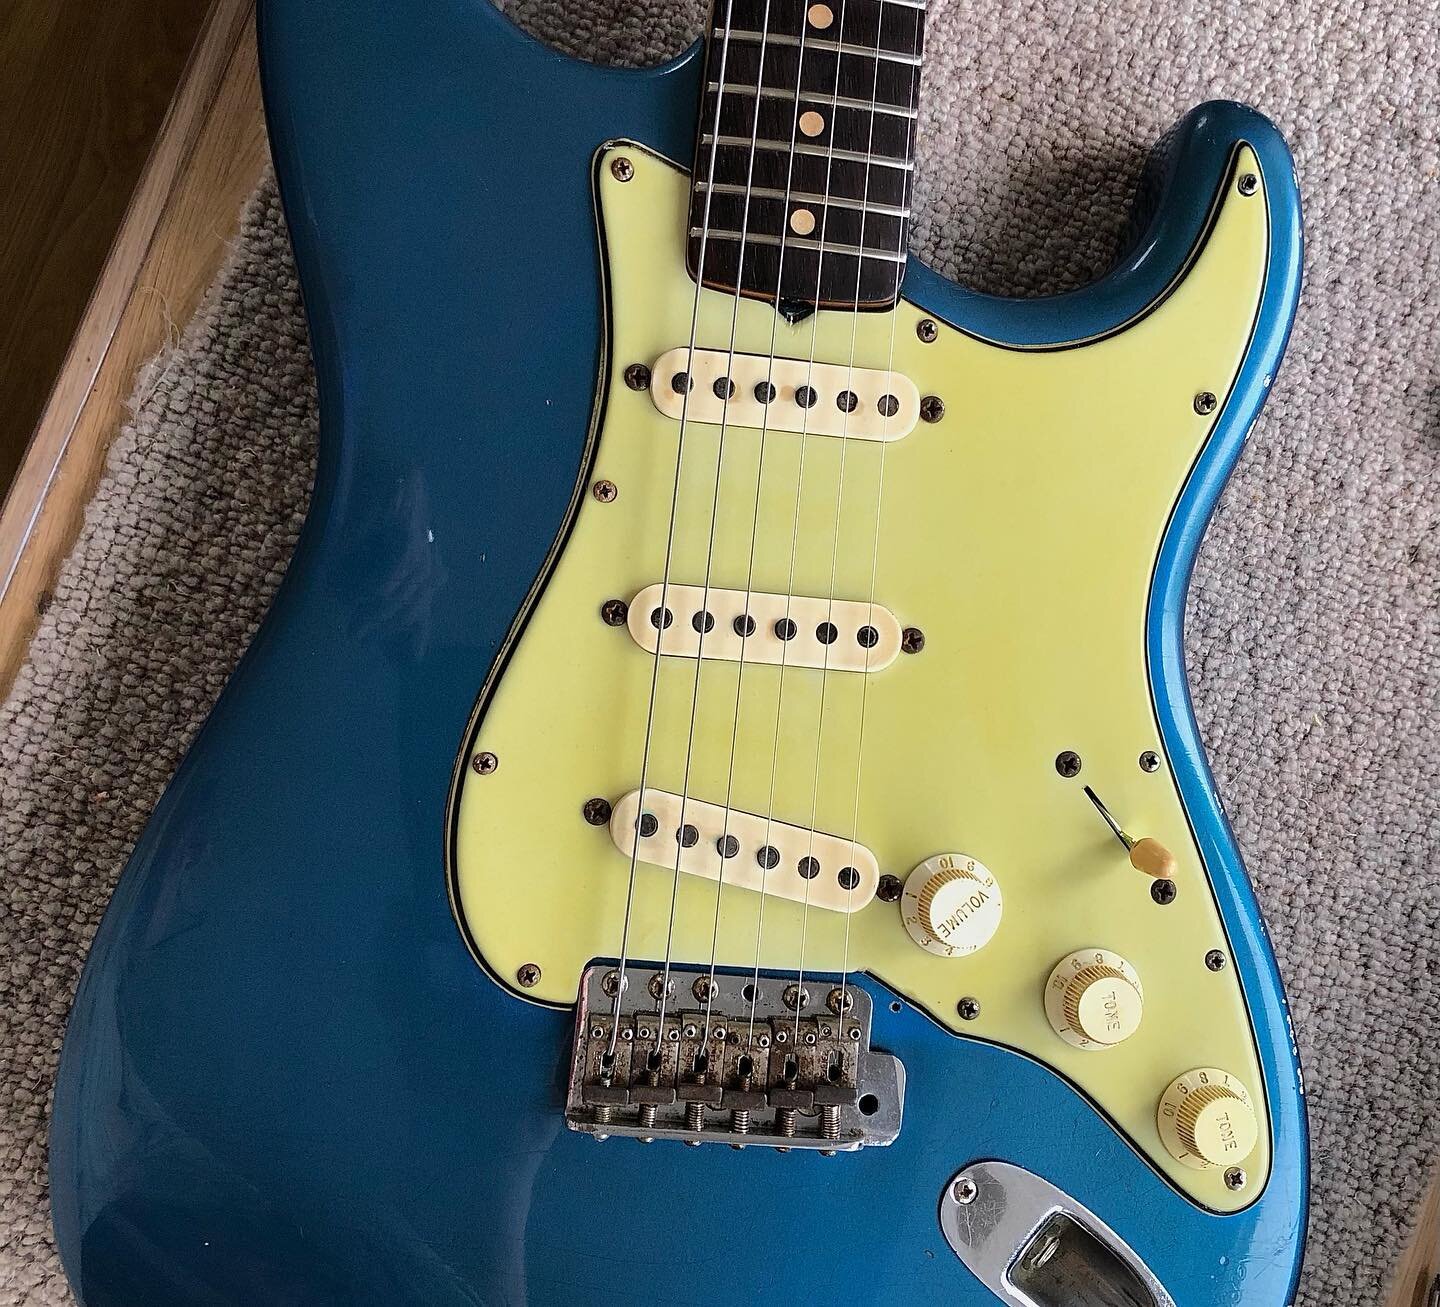 Another #precbs #stratocaster off the workbench for #straturday  @vintagerareguitars sent this late #1963stratocaster over for a #lakeplacidblue refinish and a refret. Insanely flamed neck, tone to the bone and ready to gig. Check out the shop&rsquo;